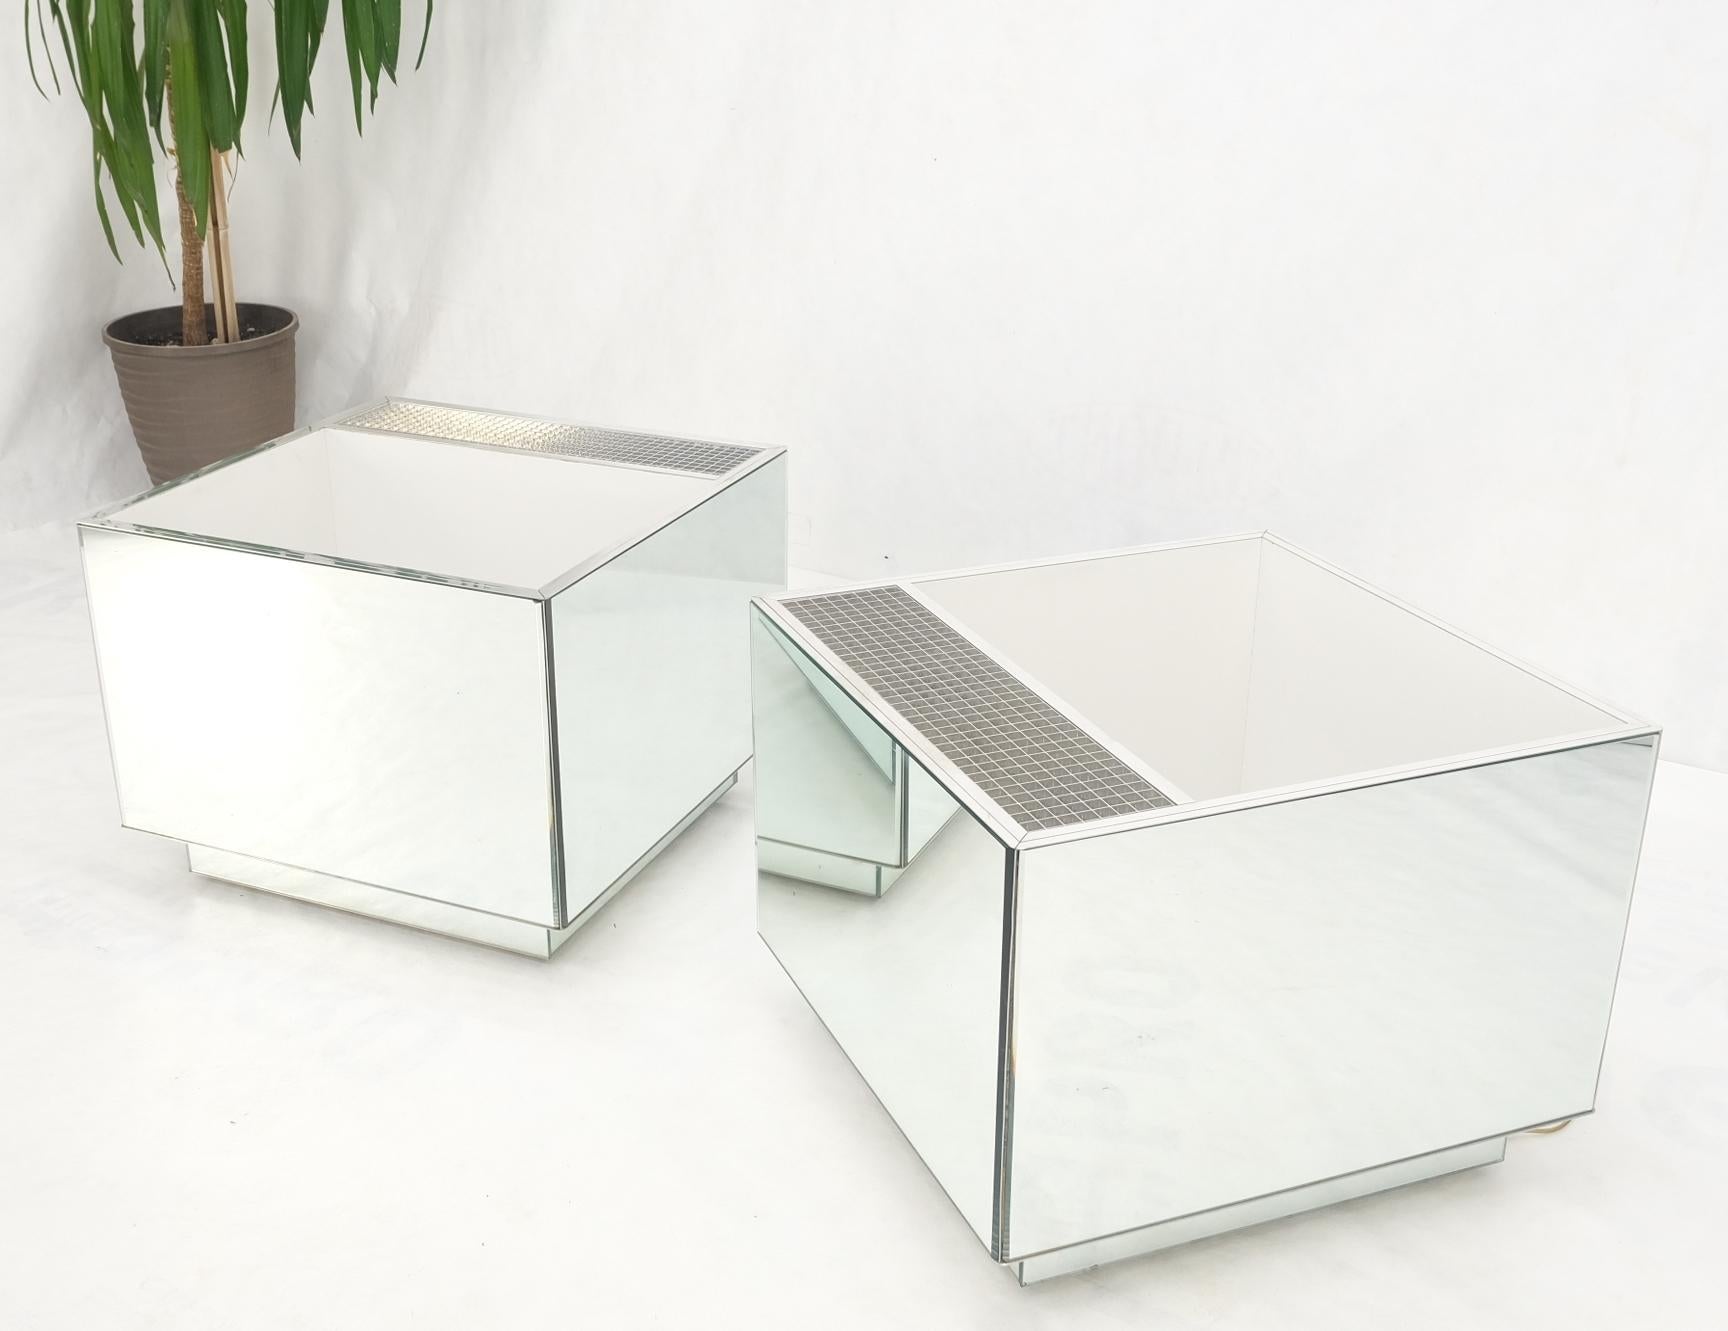 Pair of Very Fine Mirrored Box Planters Lights Stainless Steel Cases For Sale 1